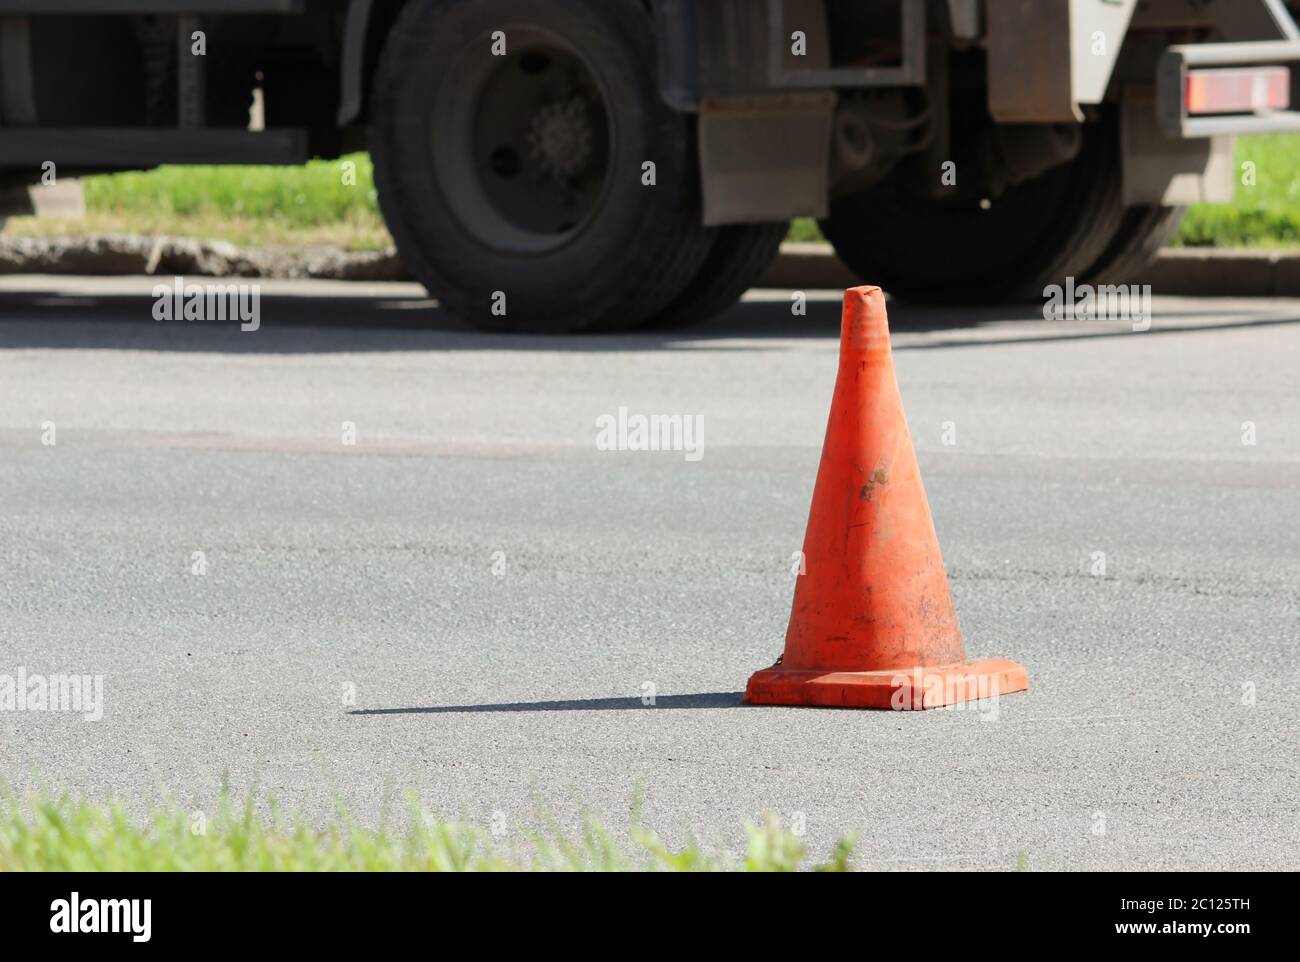 plastic signaling traffic cone encloses a place in the parking lot for trucks Stock Photo